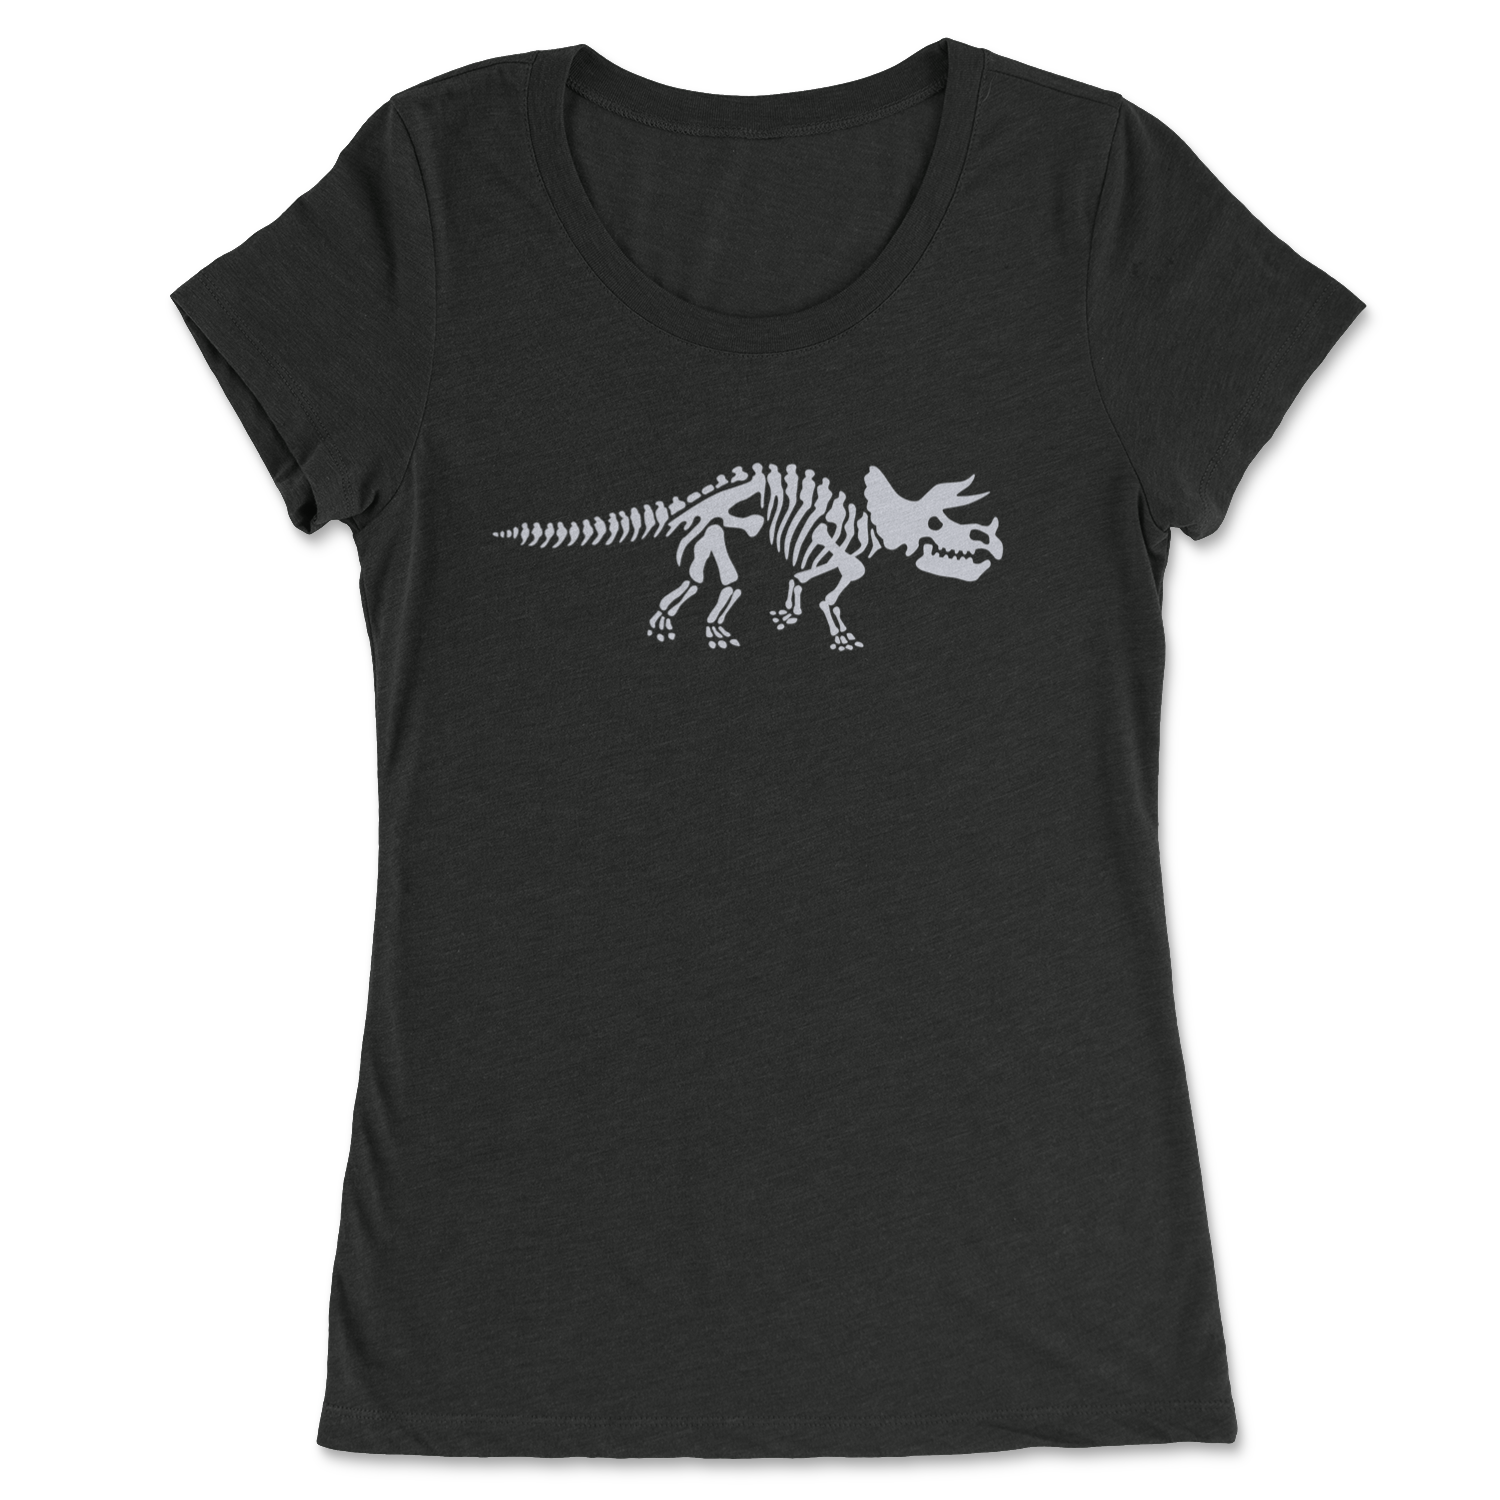 This short sleeved charcoal black t-shirt displays the skeleton of a triceratops dinosaur, printed in silver ink.